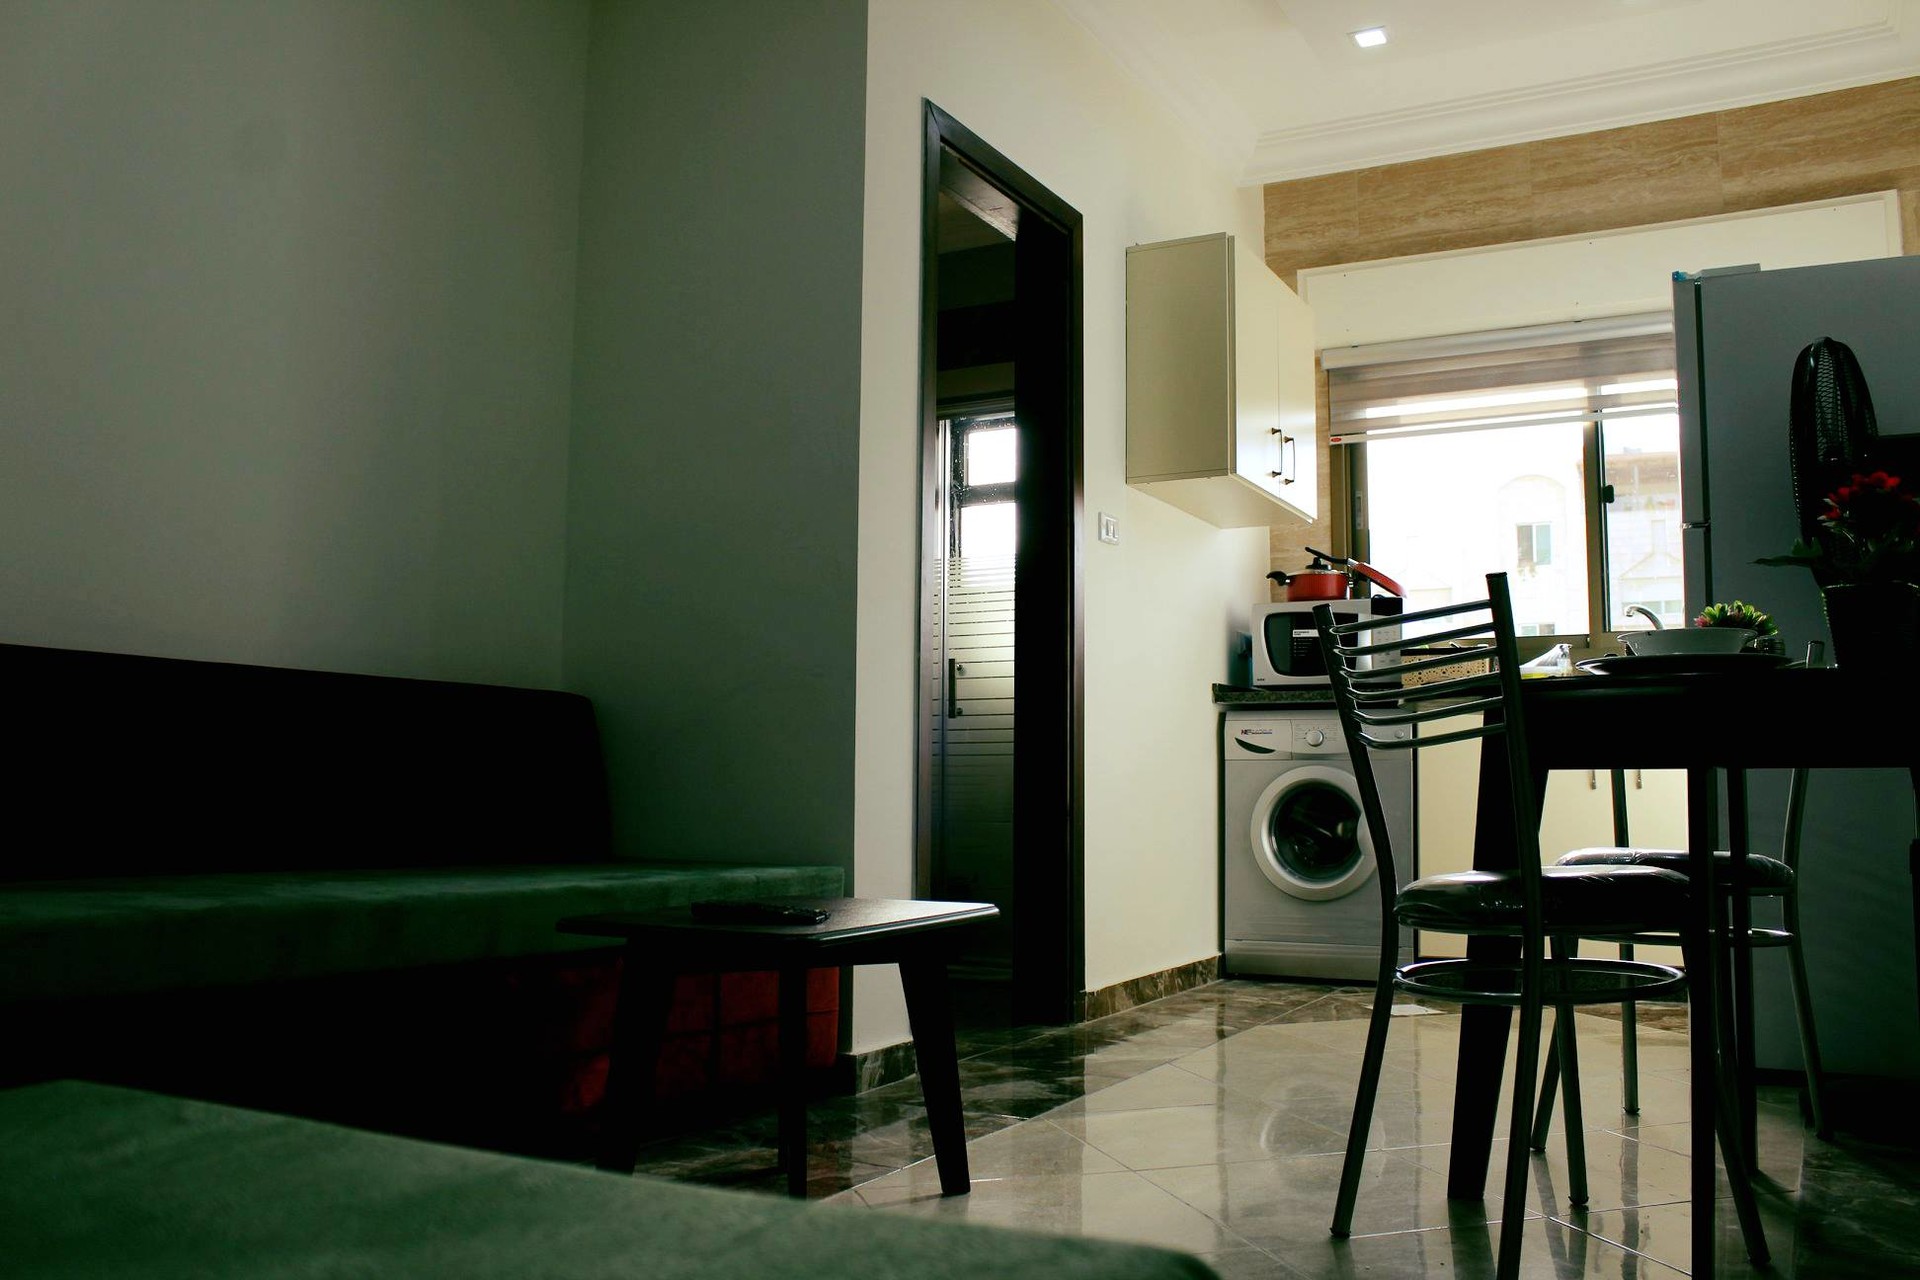 Small furnished apartments for rent - Amman - Jordan - near to the ...